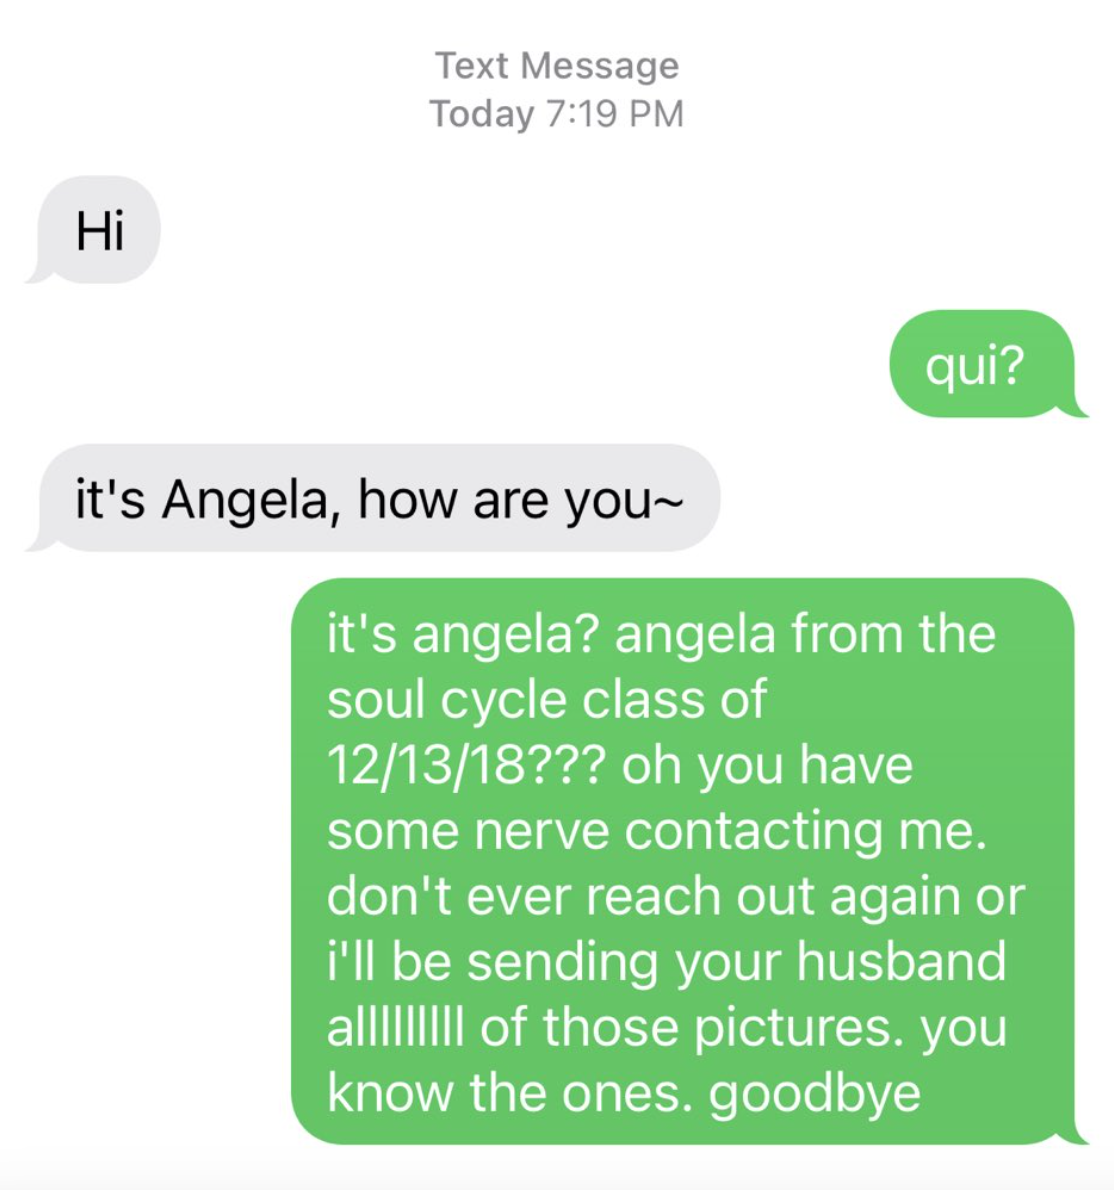 Person tells &quot;Angela from the Soul Cycle class&quot; she has some nerve contacting her, and don&#x27;t reach out agai n or she&#x27;ll send Angela&#x27;s husband all of &quot;those photos&quot;